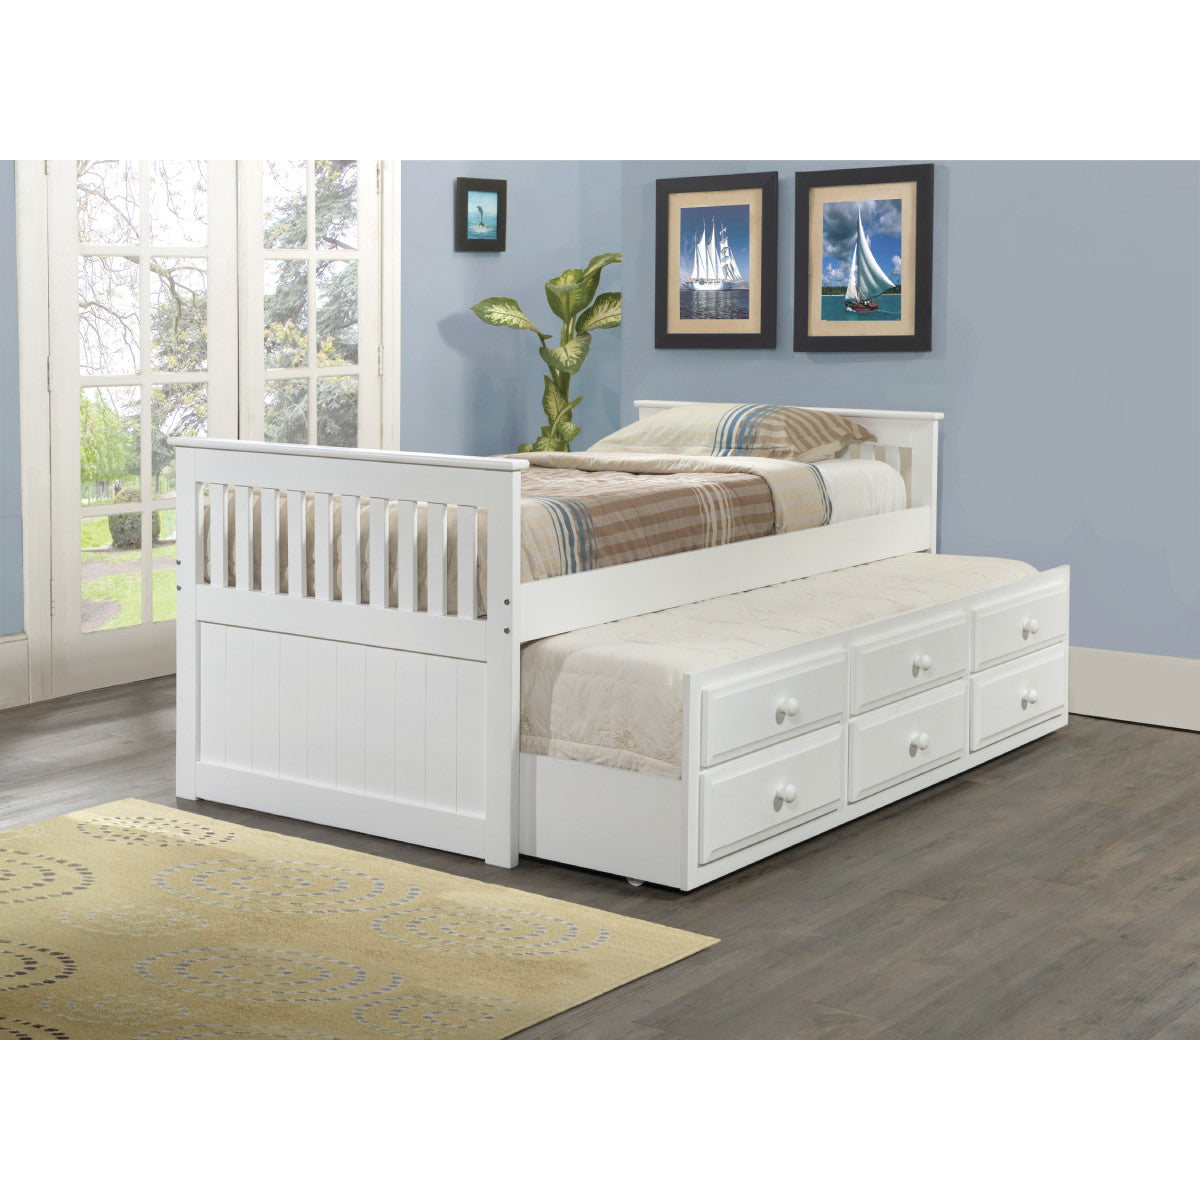 TWIN MISSION CAPTAINS TRUNDLE BED WHITE